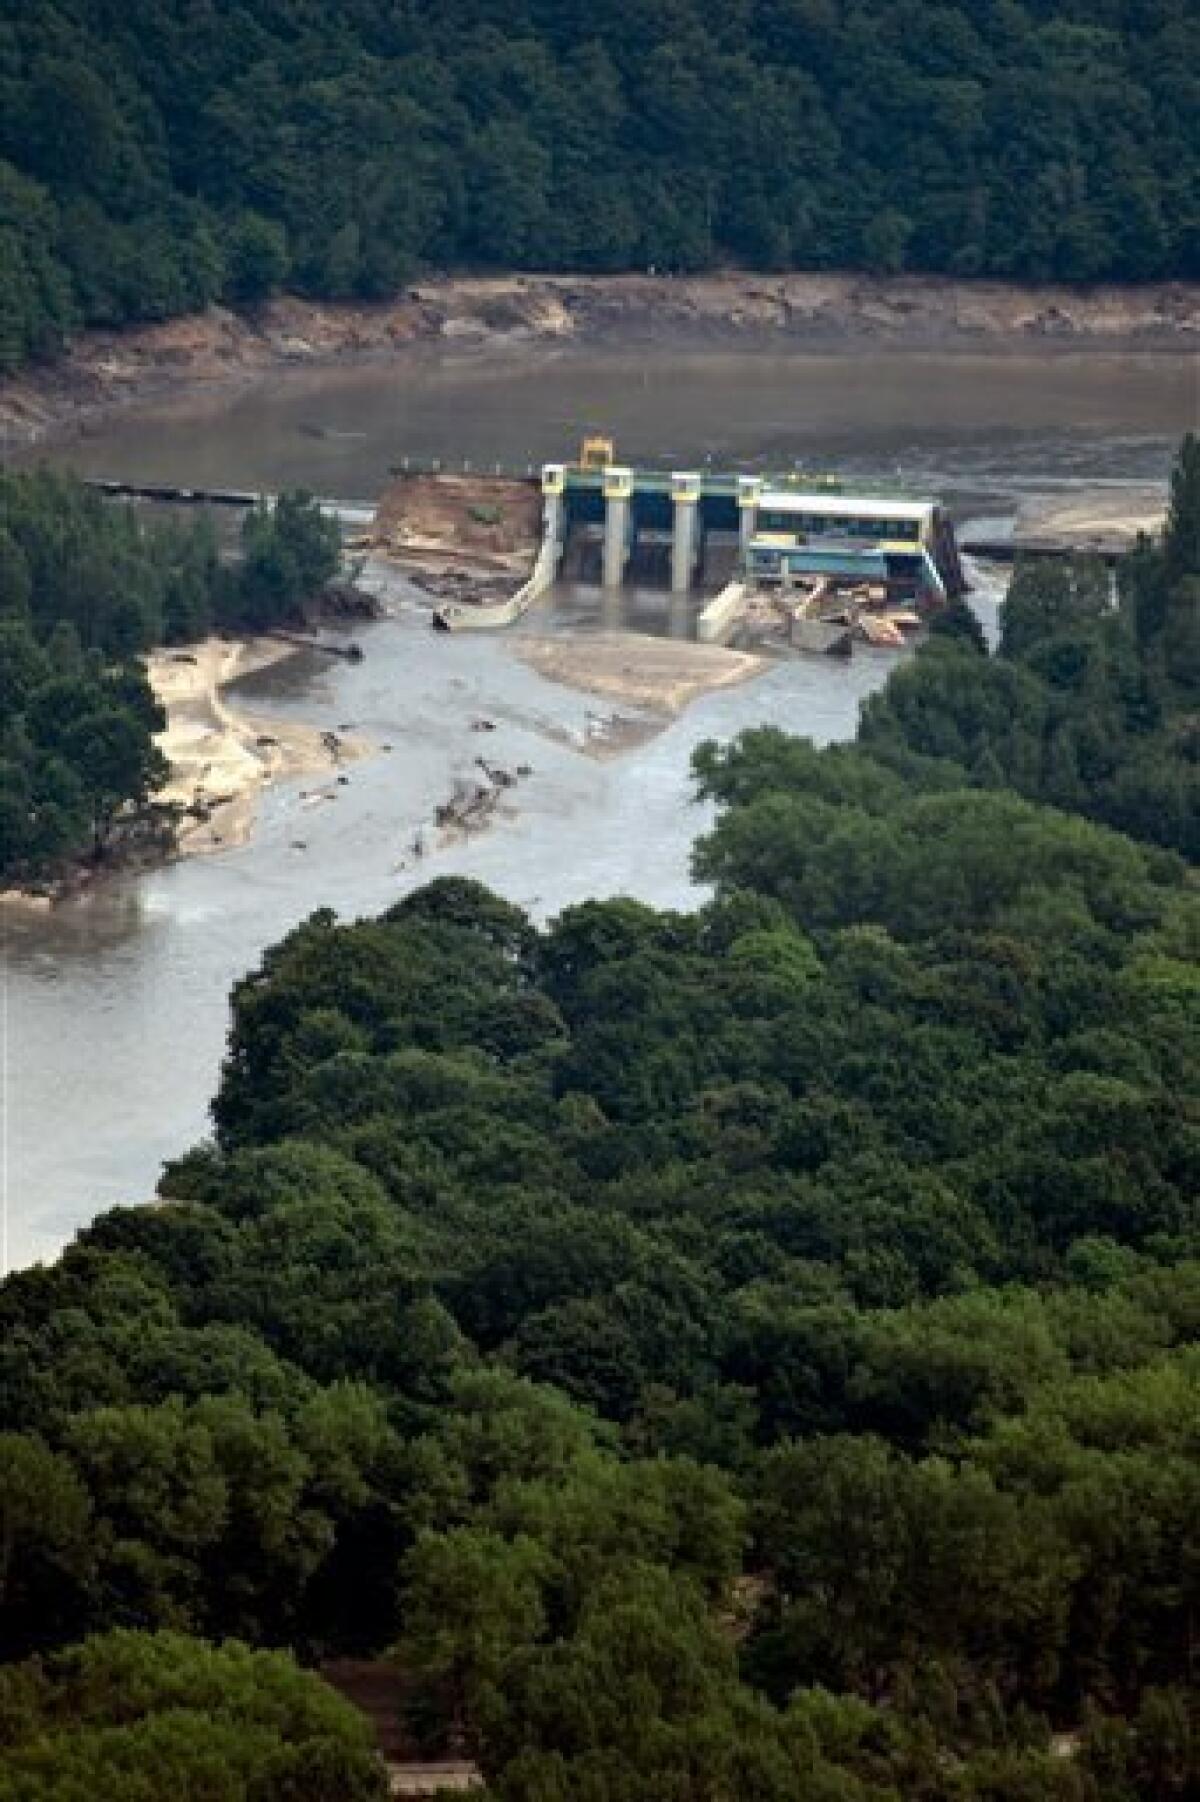 Aerial view shows the broken wall of the Witka dam near Radomierzyce, Poland near the German boder Sunday Aug. 8, 2010. The death toll in flooding in central Europe rose more than 10 as Poland's interior minister said Sunday that two more people had died in the southwestern region of the country. The flooding has struck an area near the borders of Poland, Germany and the Czech Republic. (AP Photo/ddp/ Jens Schlueter/ddp)